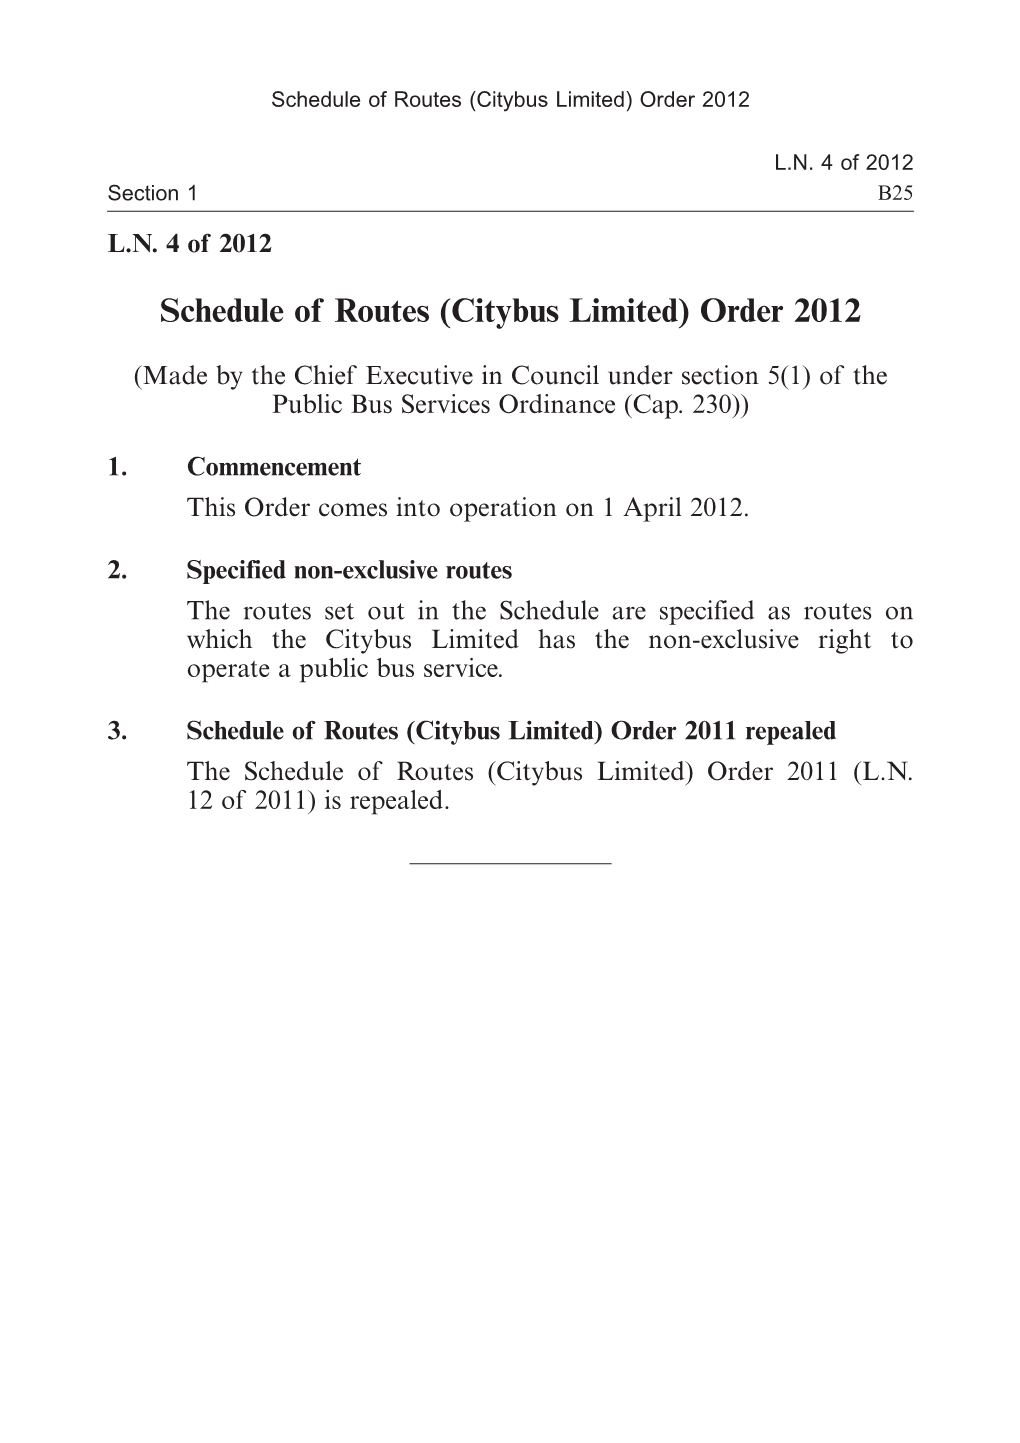 Schedule of Routes (Citybus Limited) Order 2012